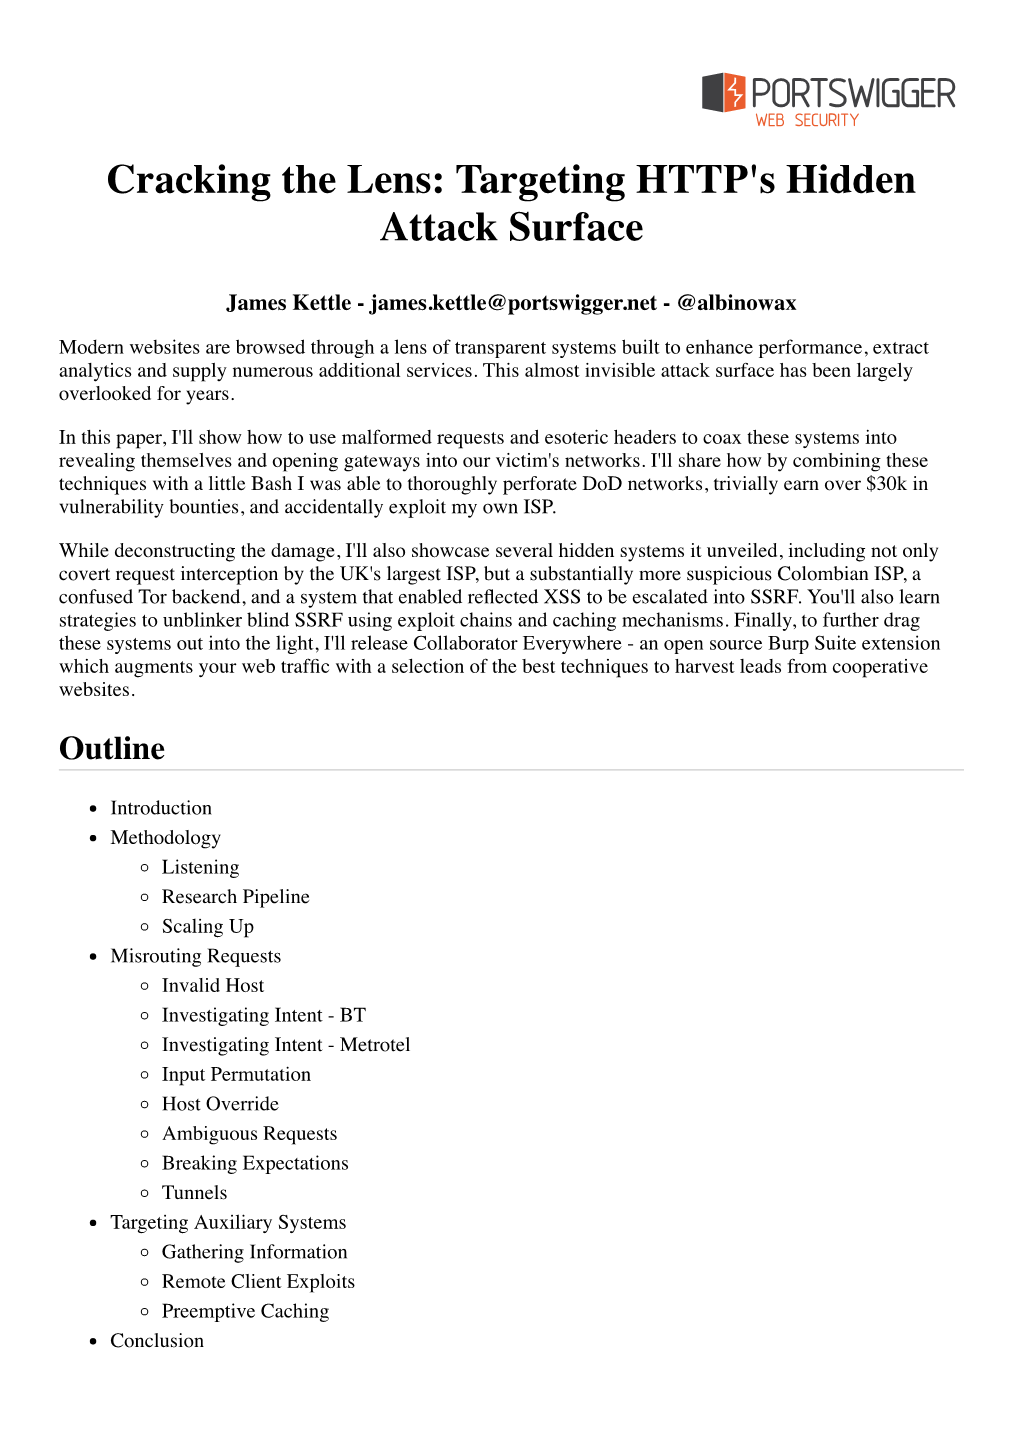 Cracking the Lens: Targeting HTTP's Hidden Attack Surface